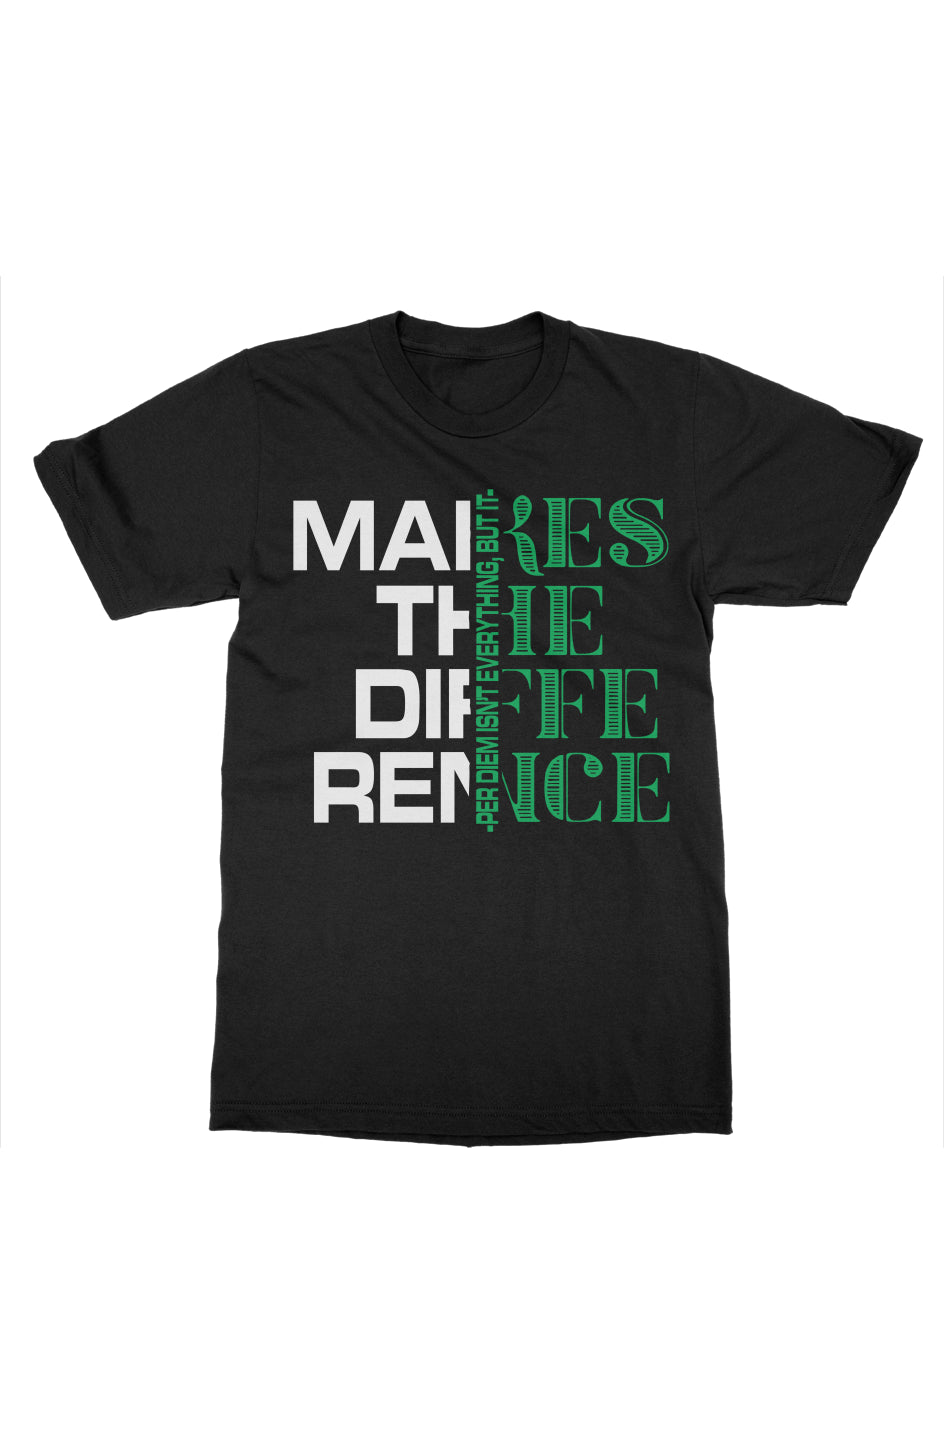 Per Diem Makes The Difference Tee- Black